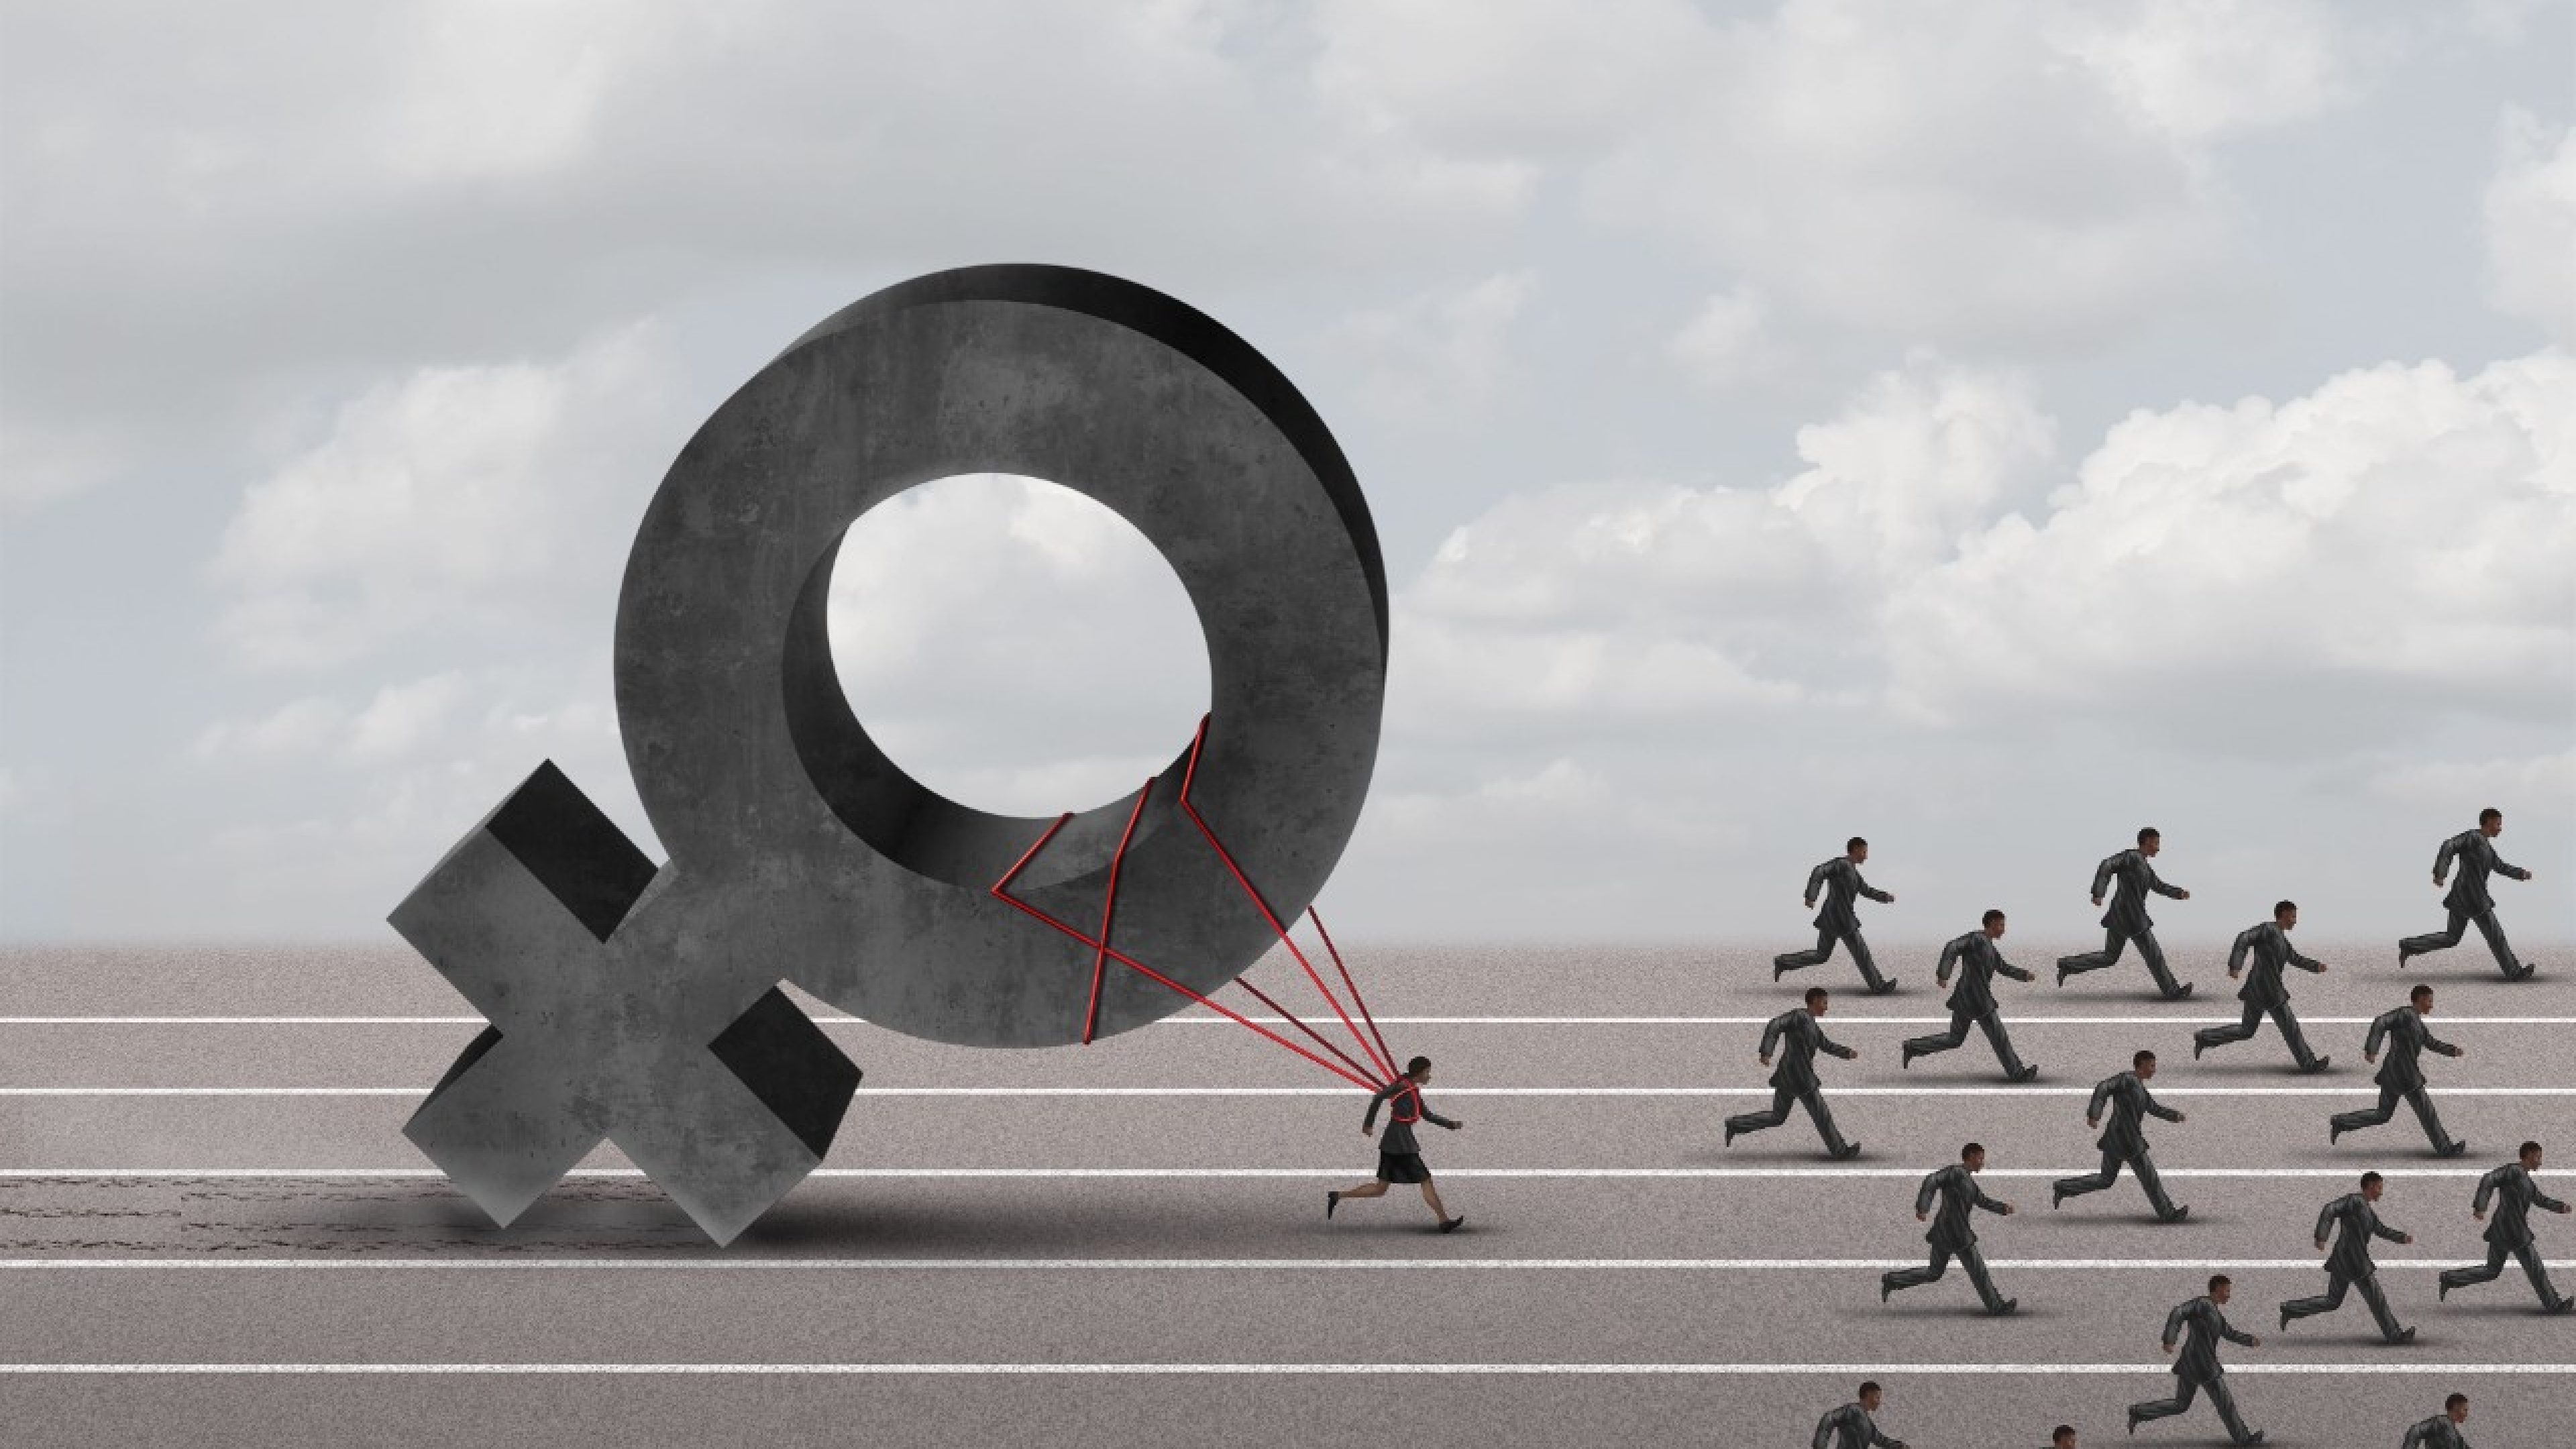 Sexism descrimination concept as a struggling woman with the burden of pulling a heavy female 3D illustration symbol falling behind a group of running businessmen or men as an unfair gender bias icon.